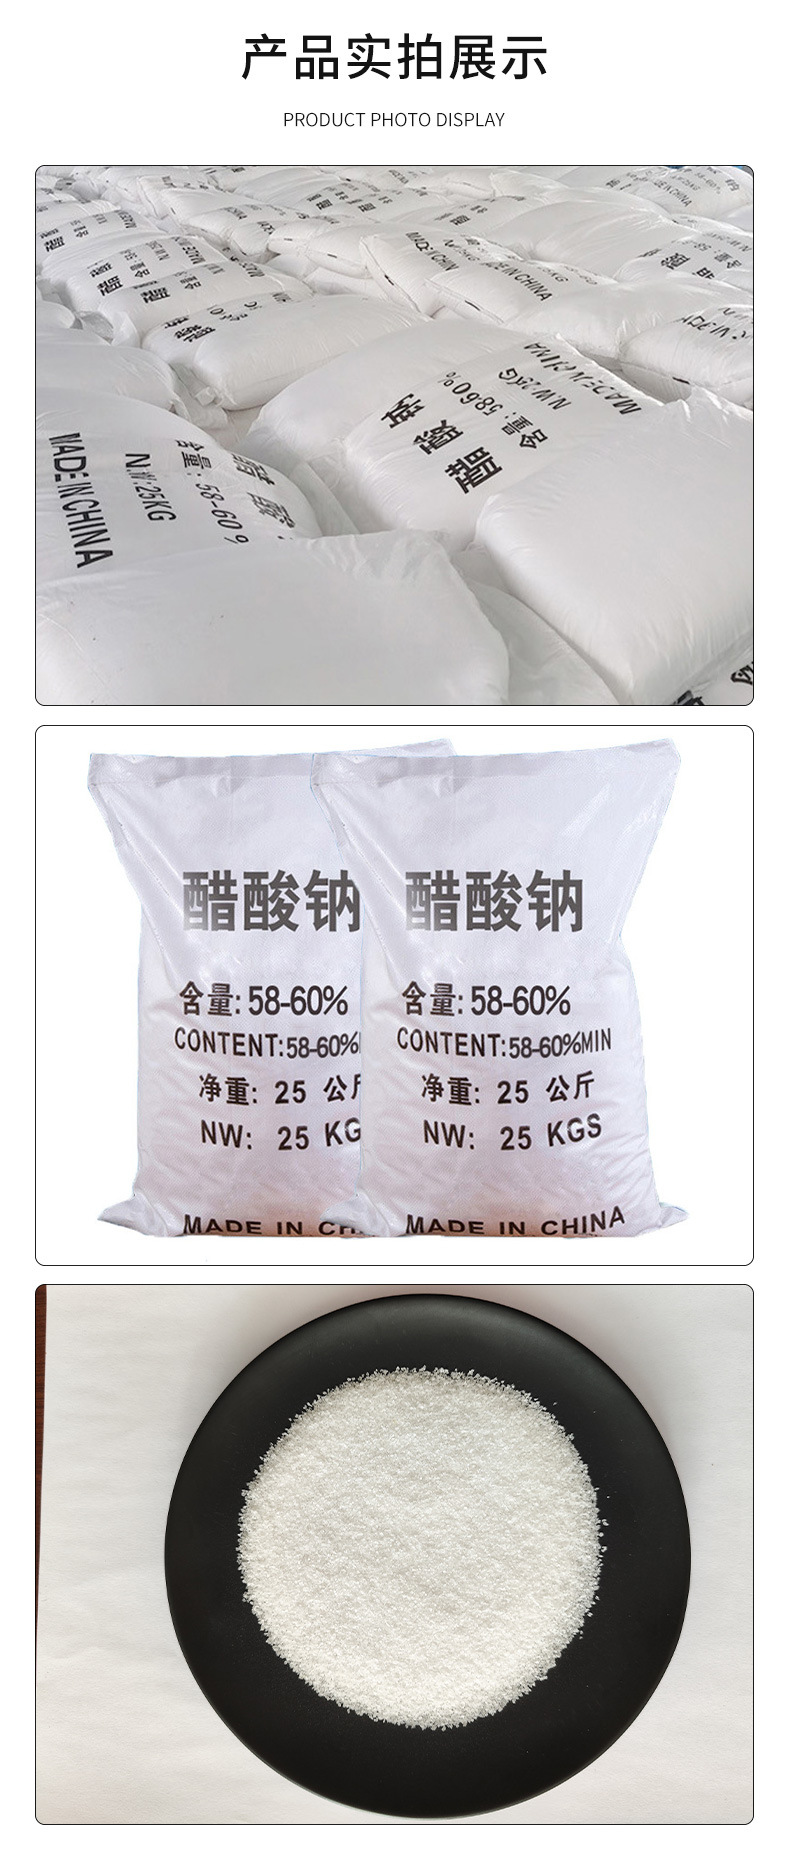 Sodium acetate, sodium acetate content 58-60%, COD equivalent more than 420000, wholesale by three environmental protection manufacturers